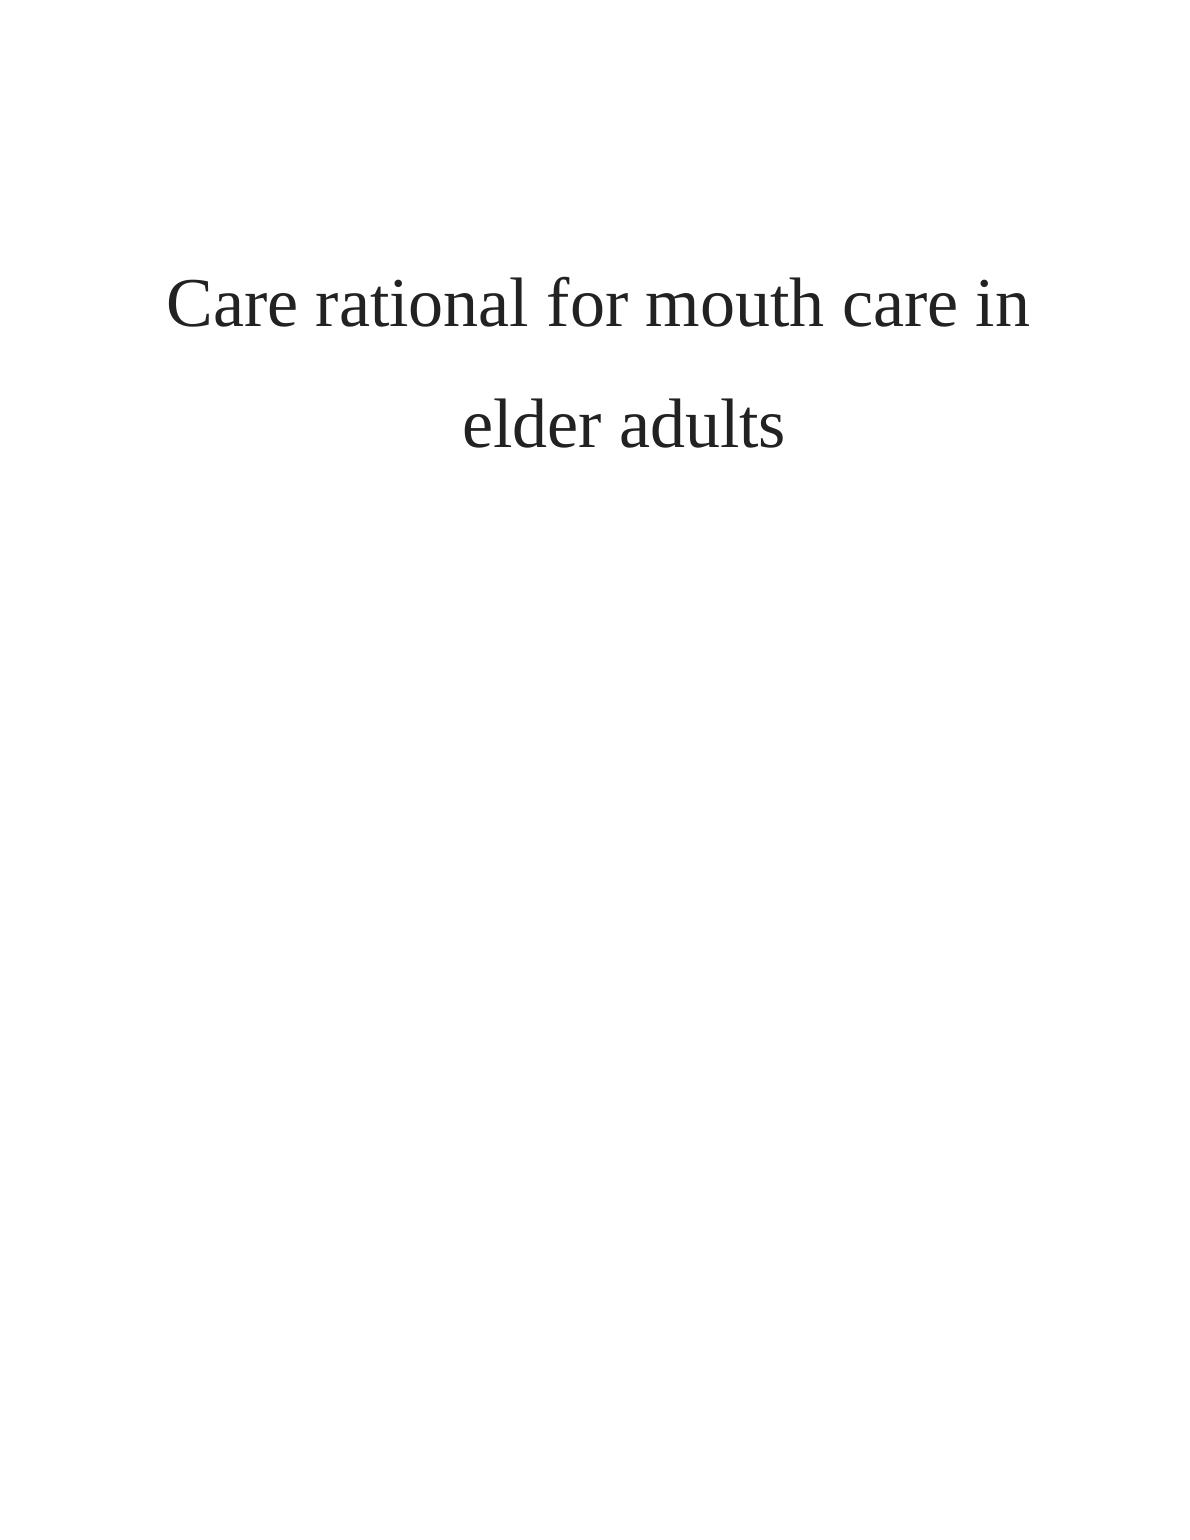 Impact on Patients From Mouth Care in Older Adults_1